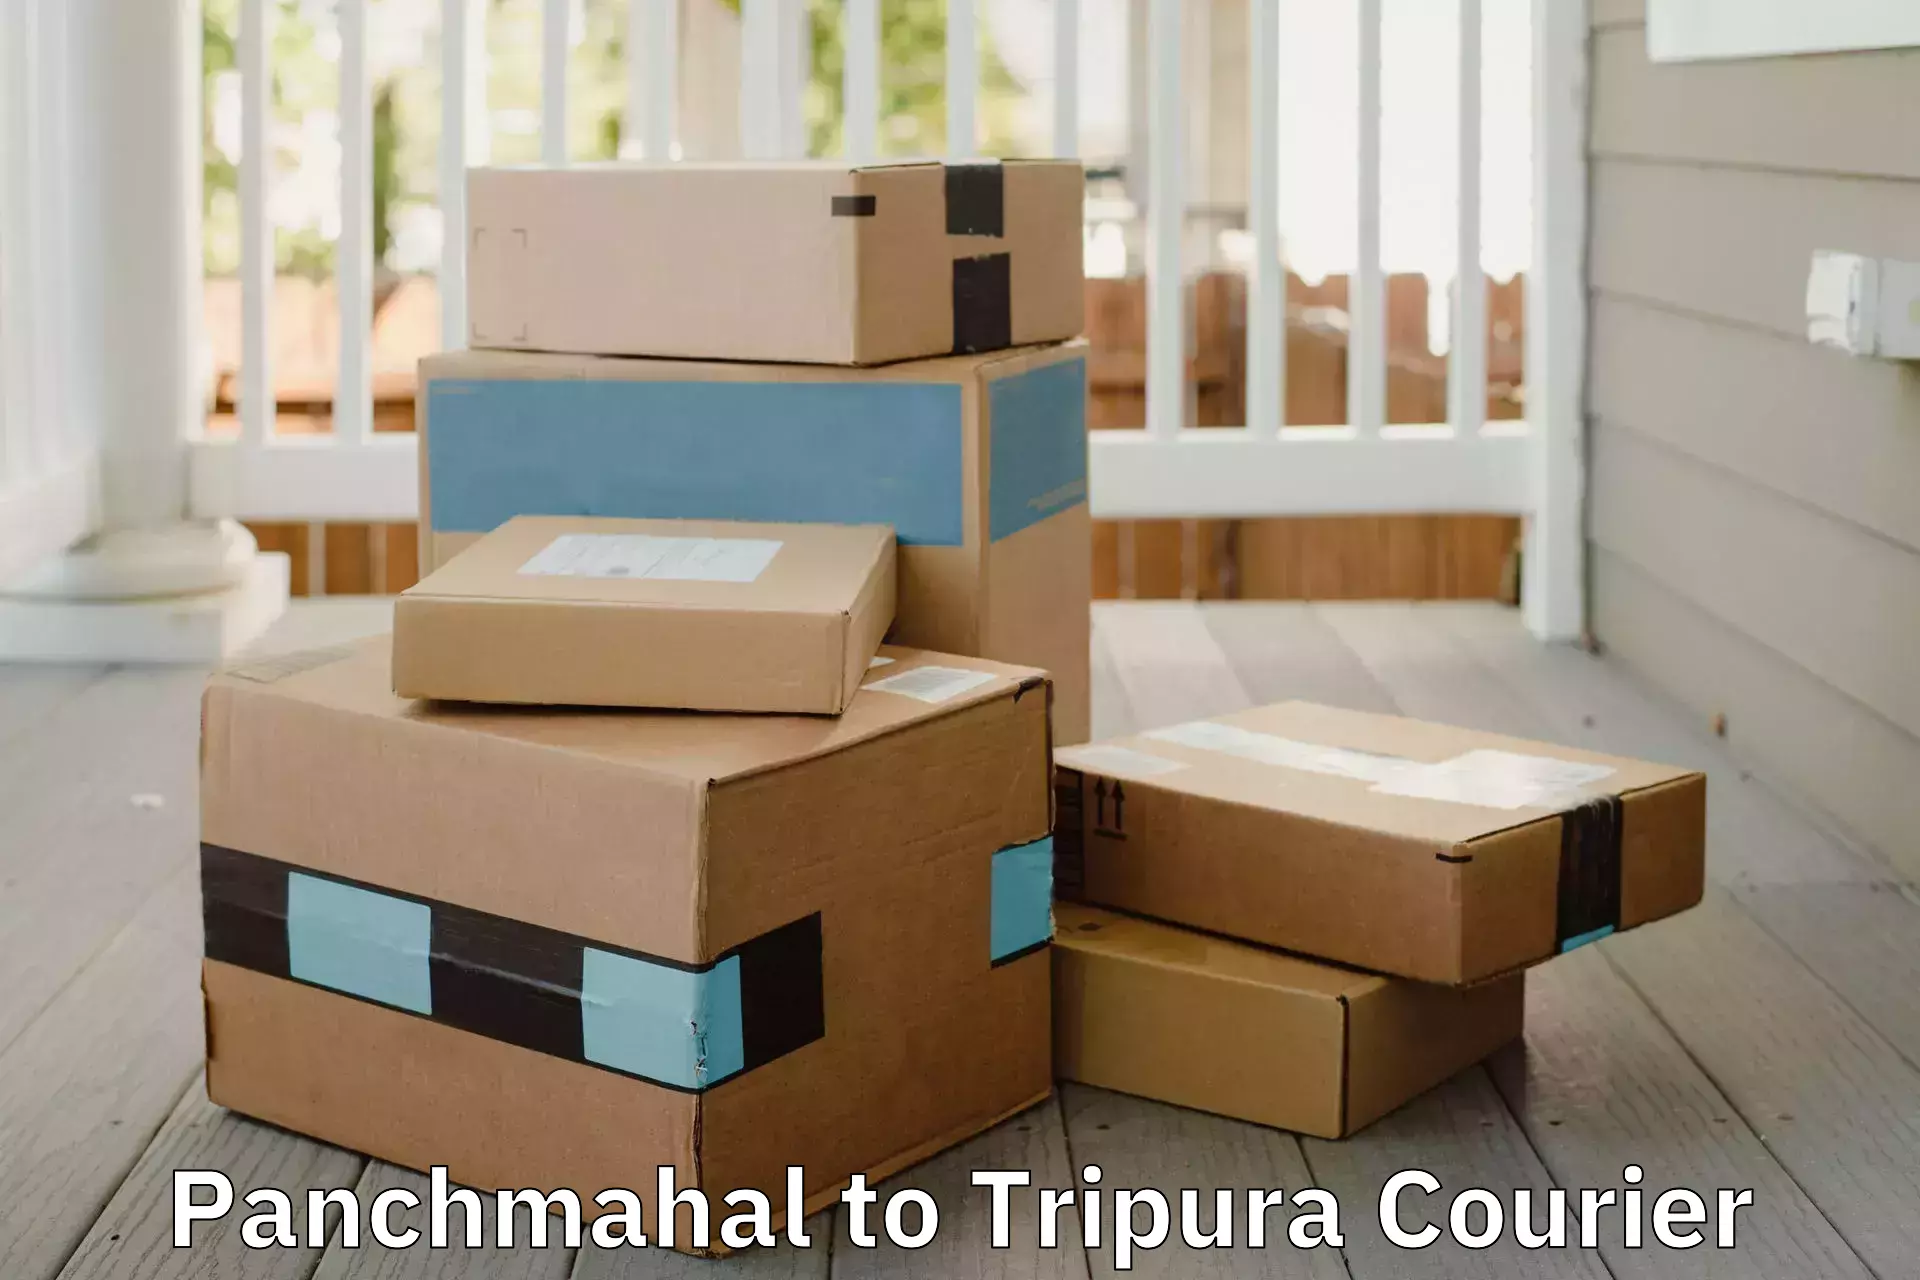 Household goods transport service in Panchmahal to Udaipur Tripura